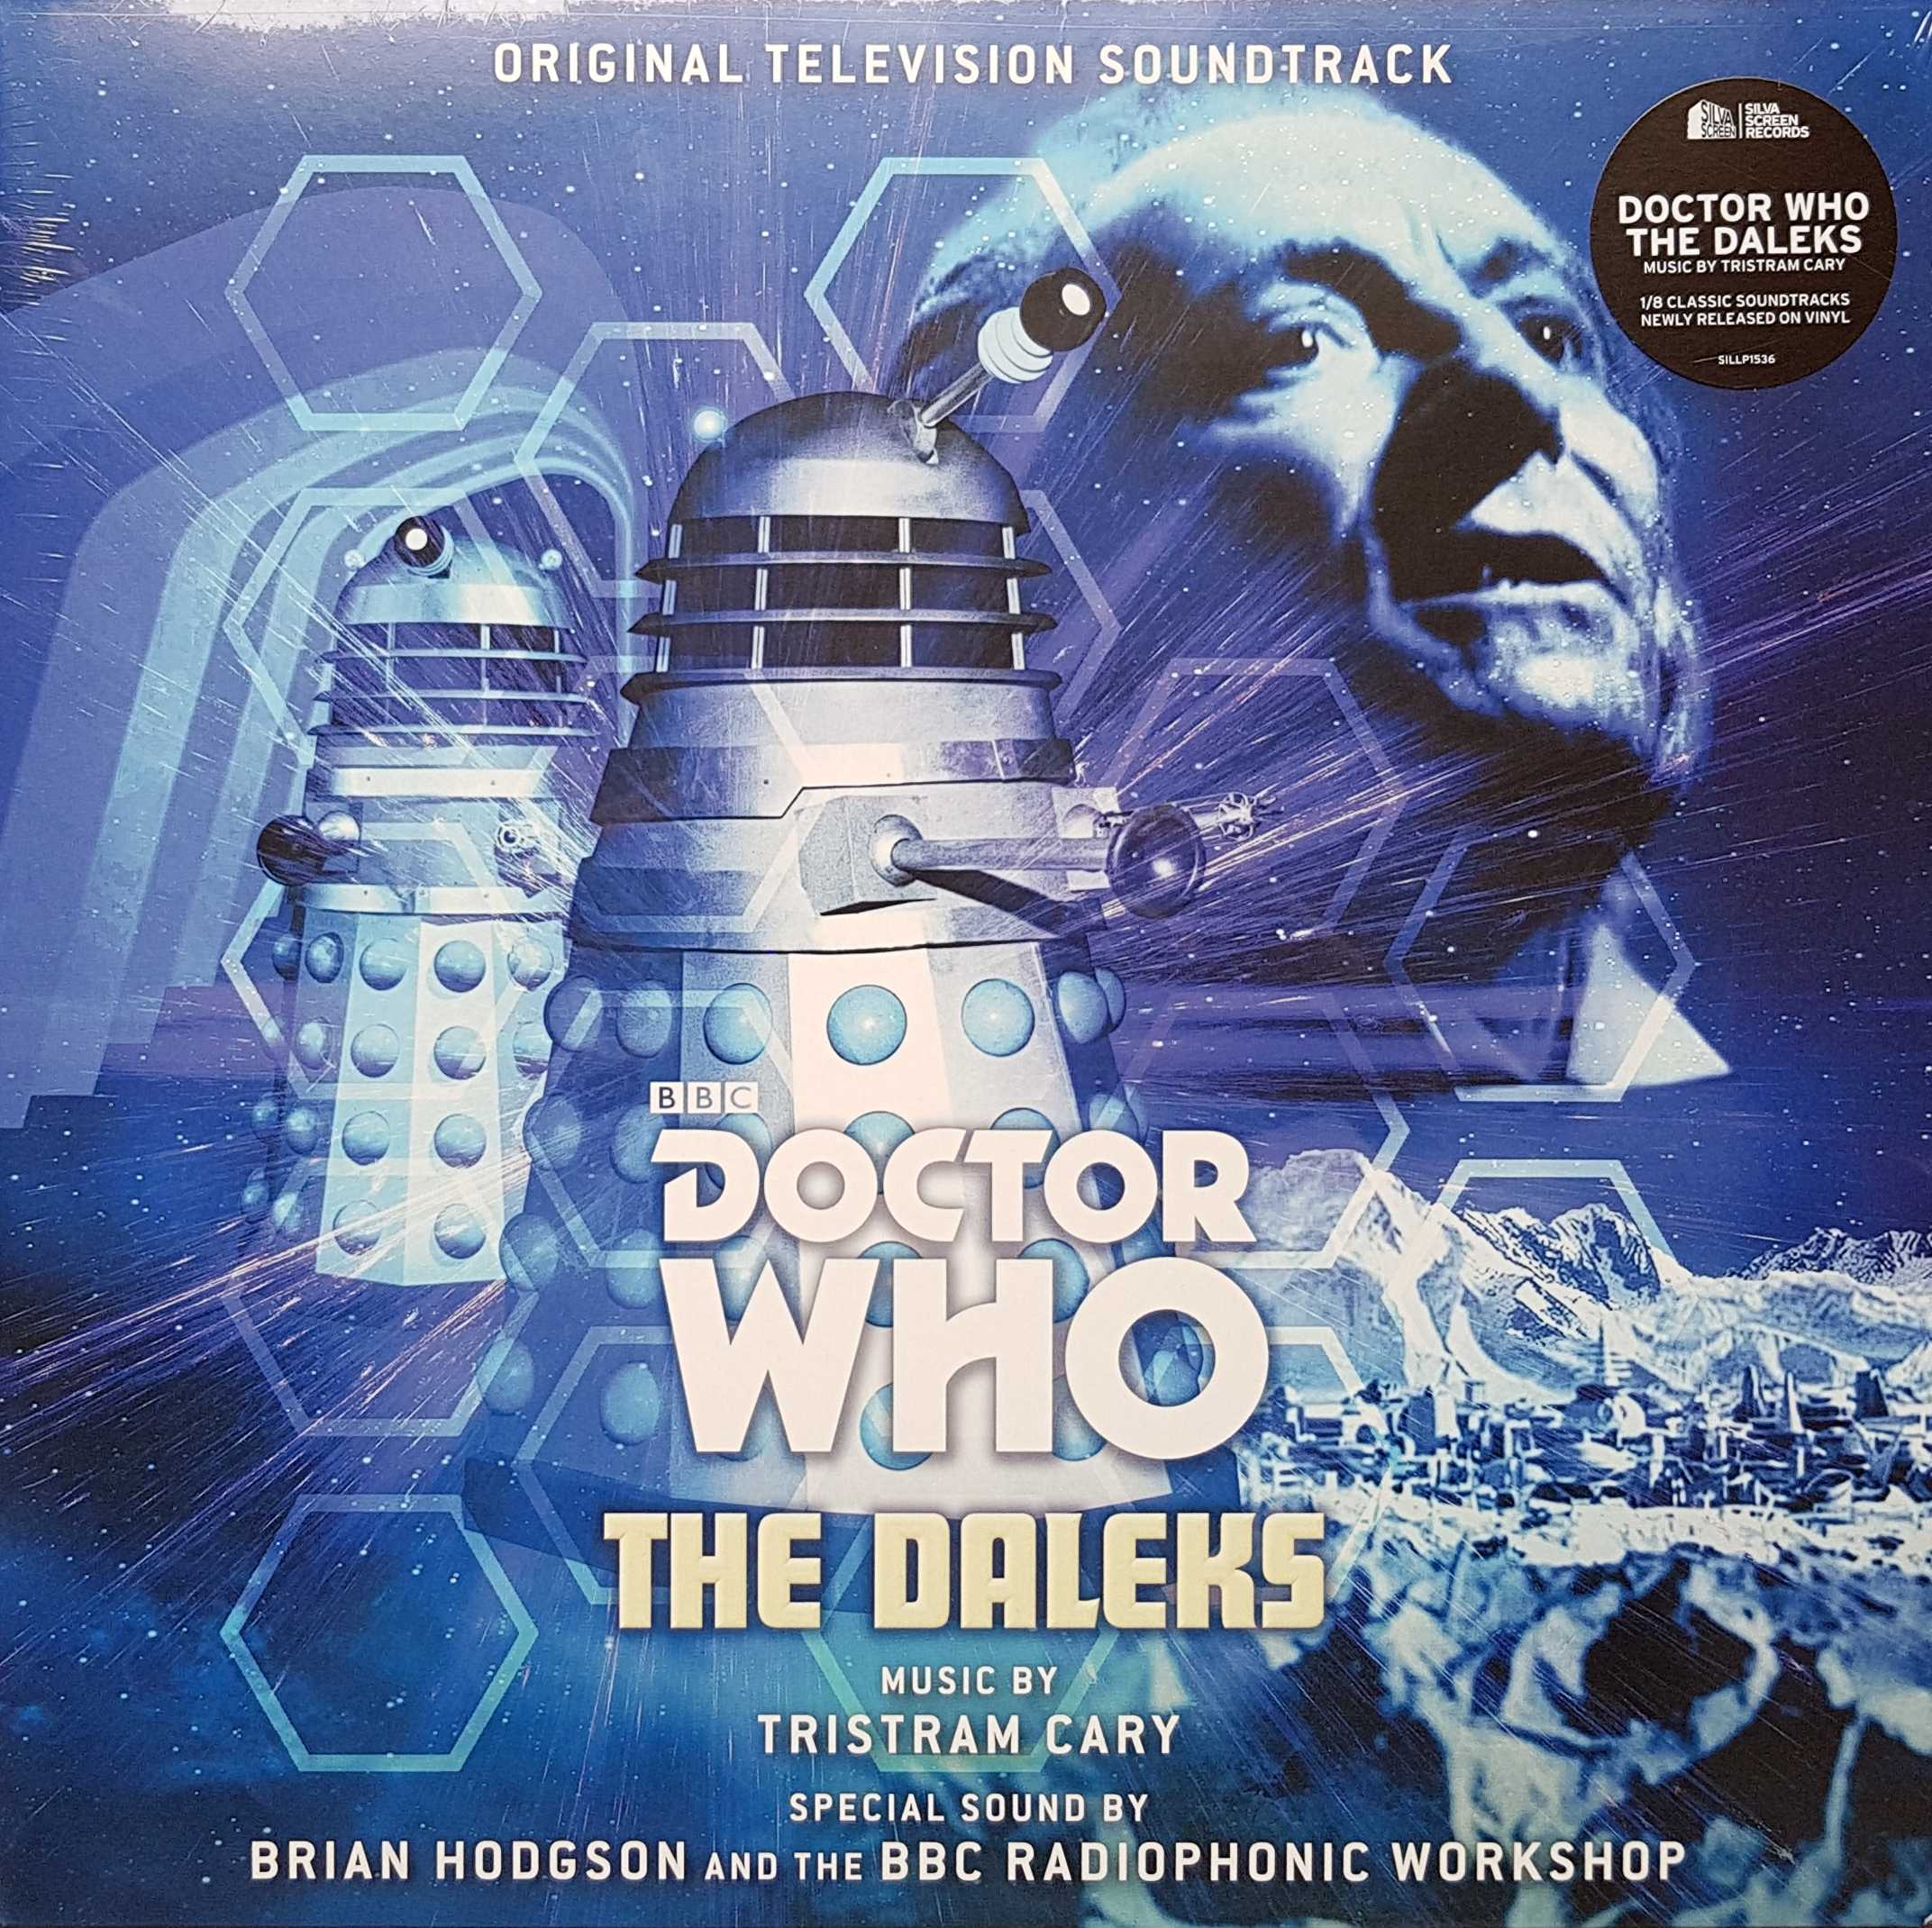 Picture of SILLP 1536 Doctor Who - The Daleks by artist Tristram Cary from the BBC records and Tapes library